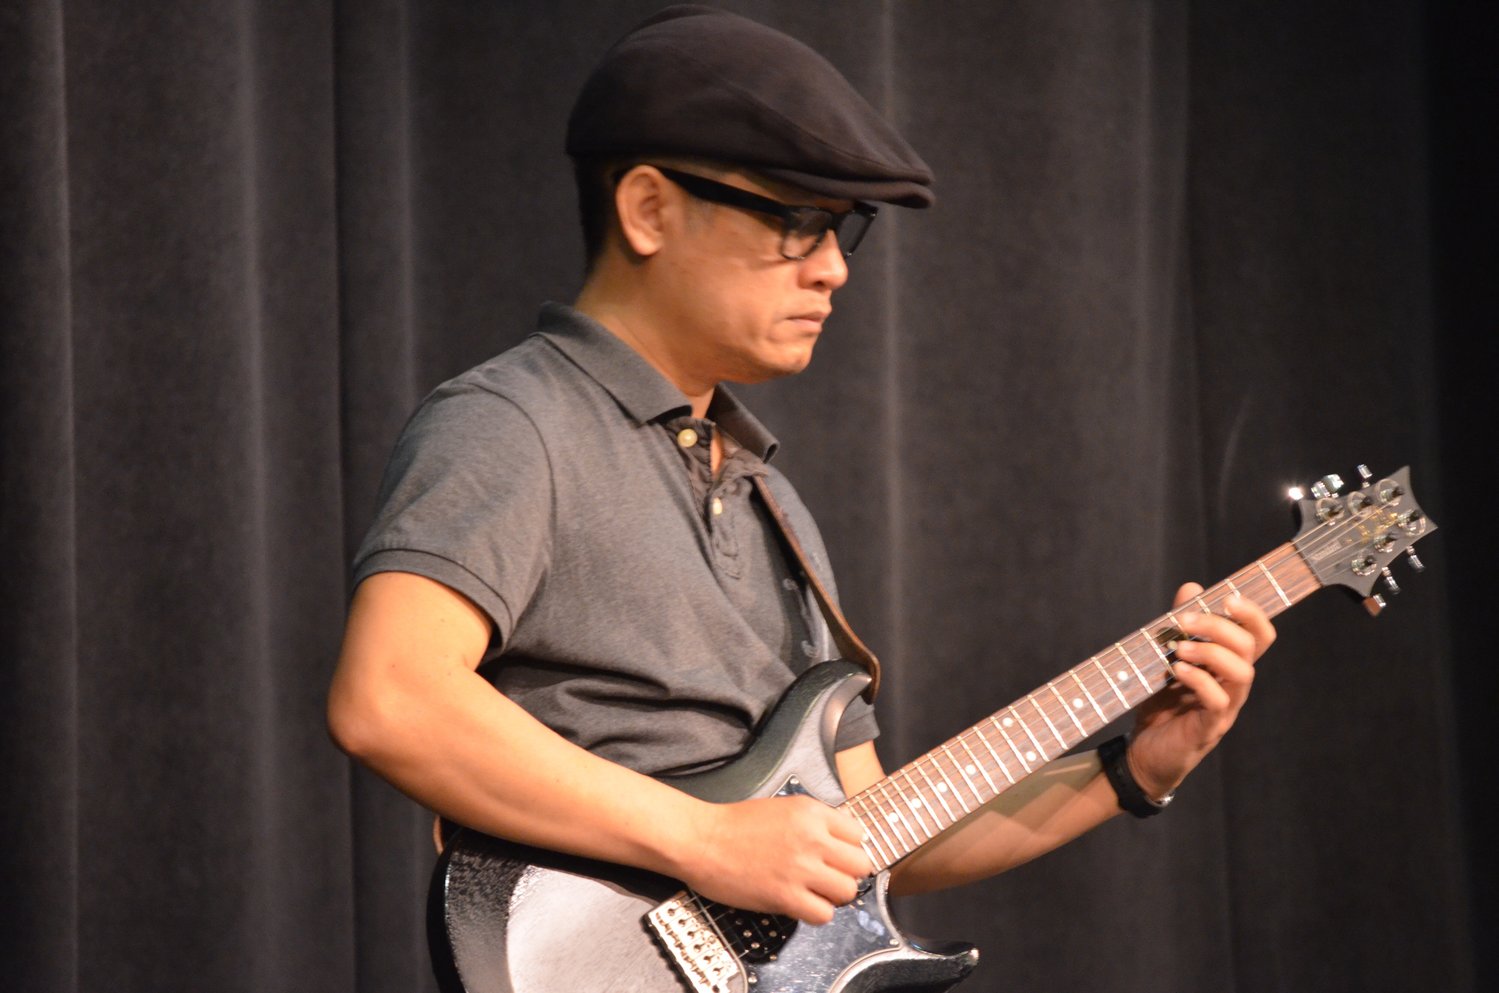 Guitarist Gai Phakdeephon took the audience back in time.